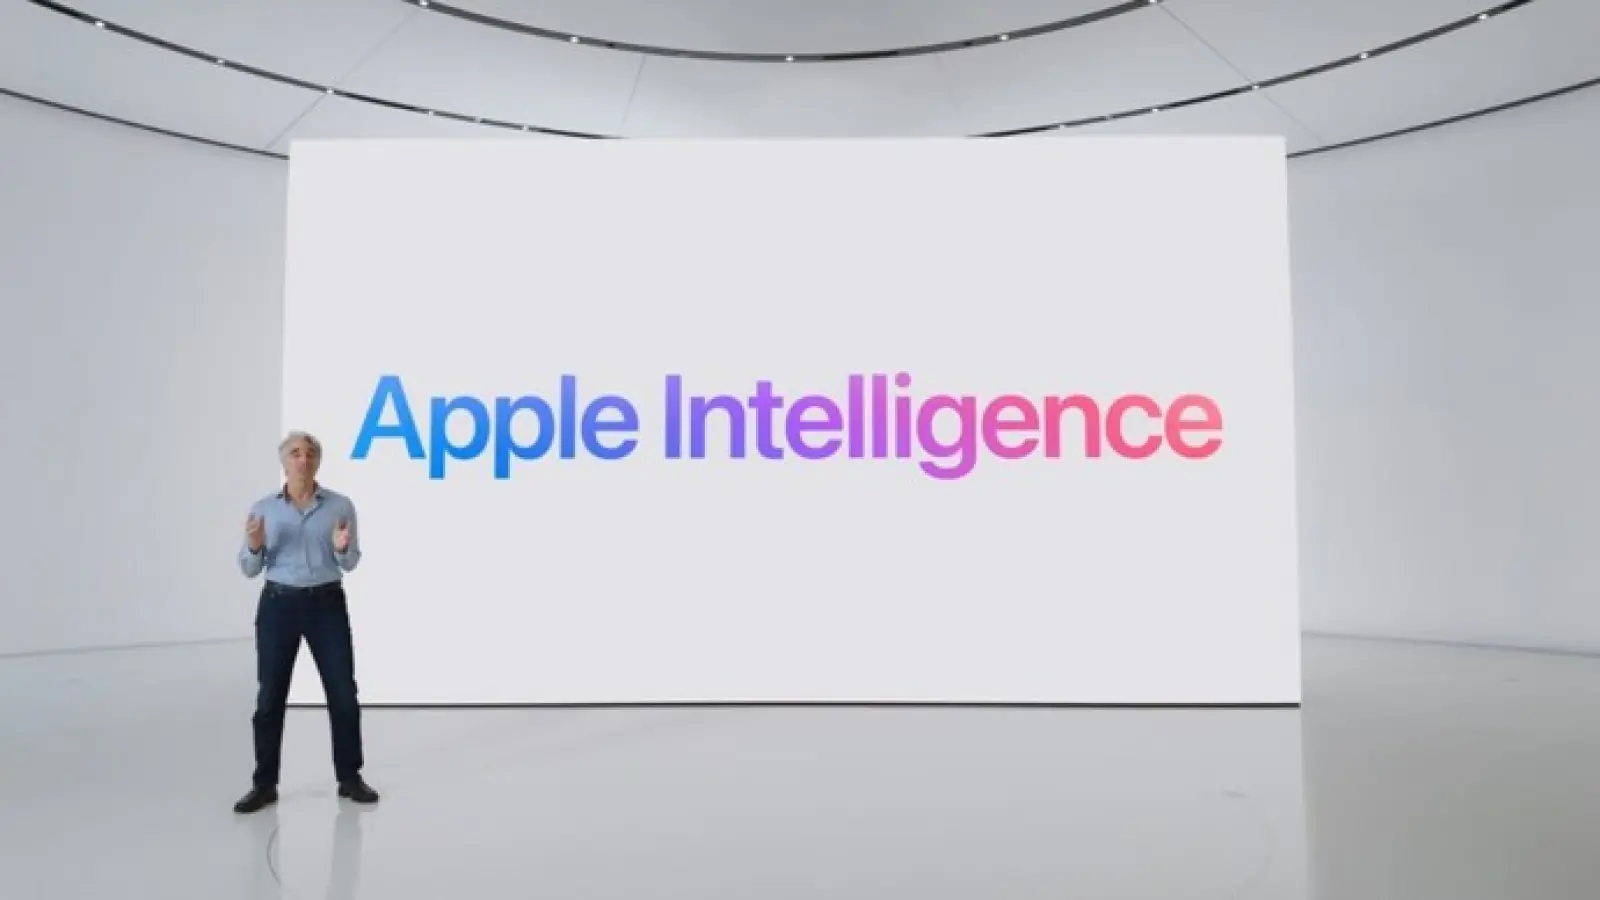 Use of AI in Apple's device will not be free, the company is preparing to bring subscription